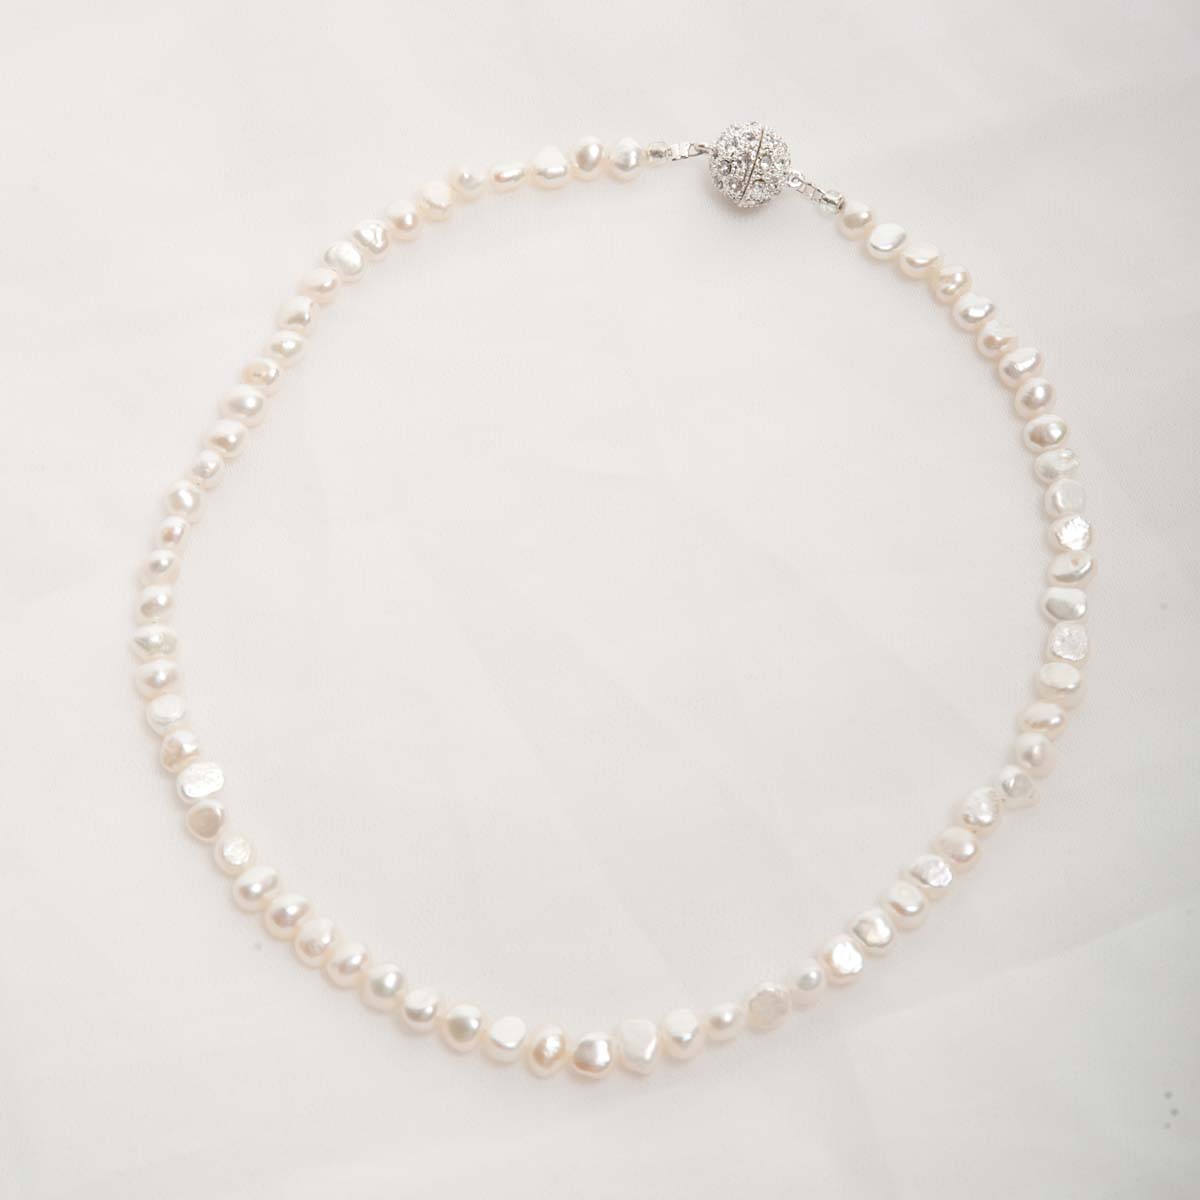 Single Strand Freshwater Pearl Necklace with a magnet clasp | Irish ...